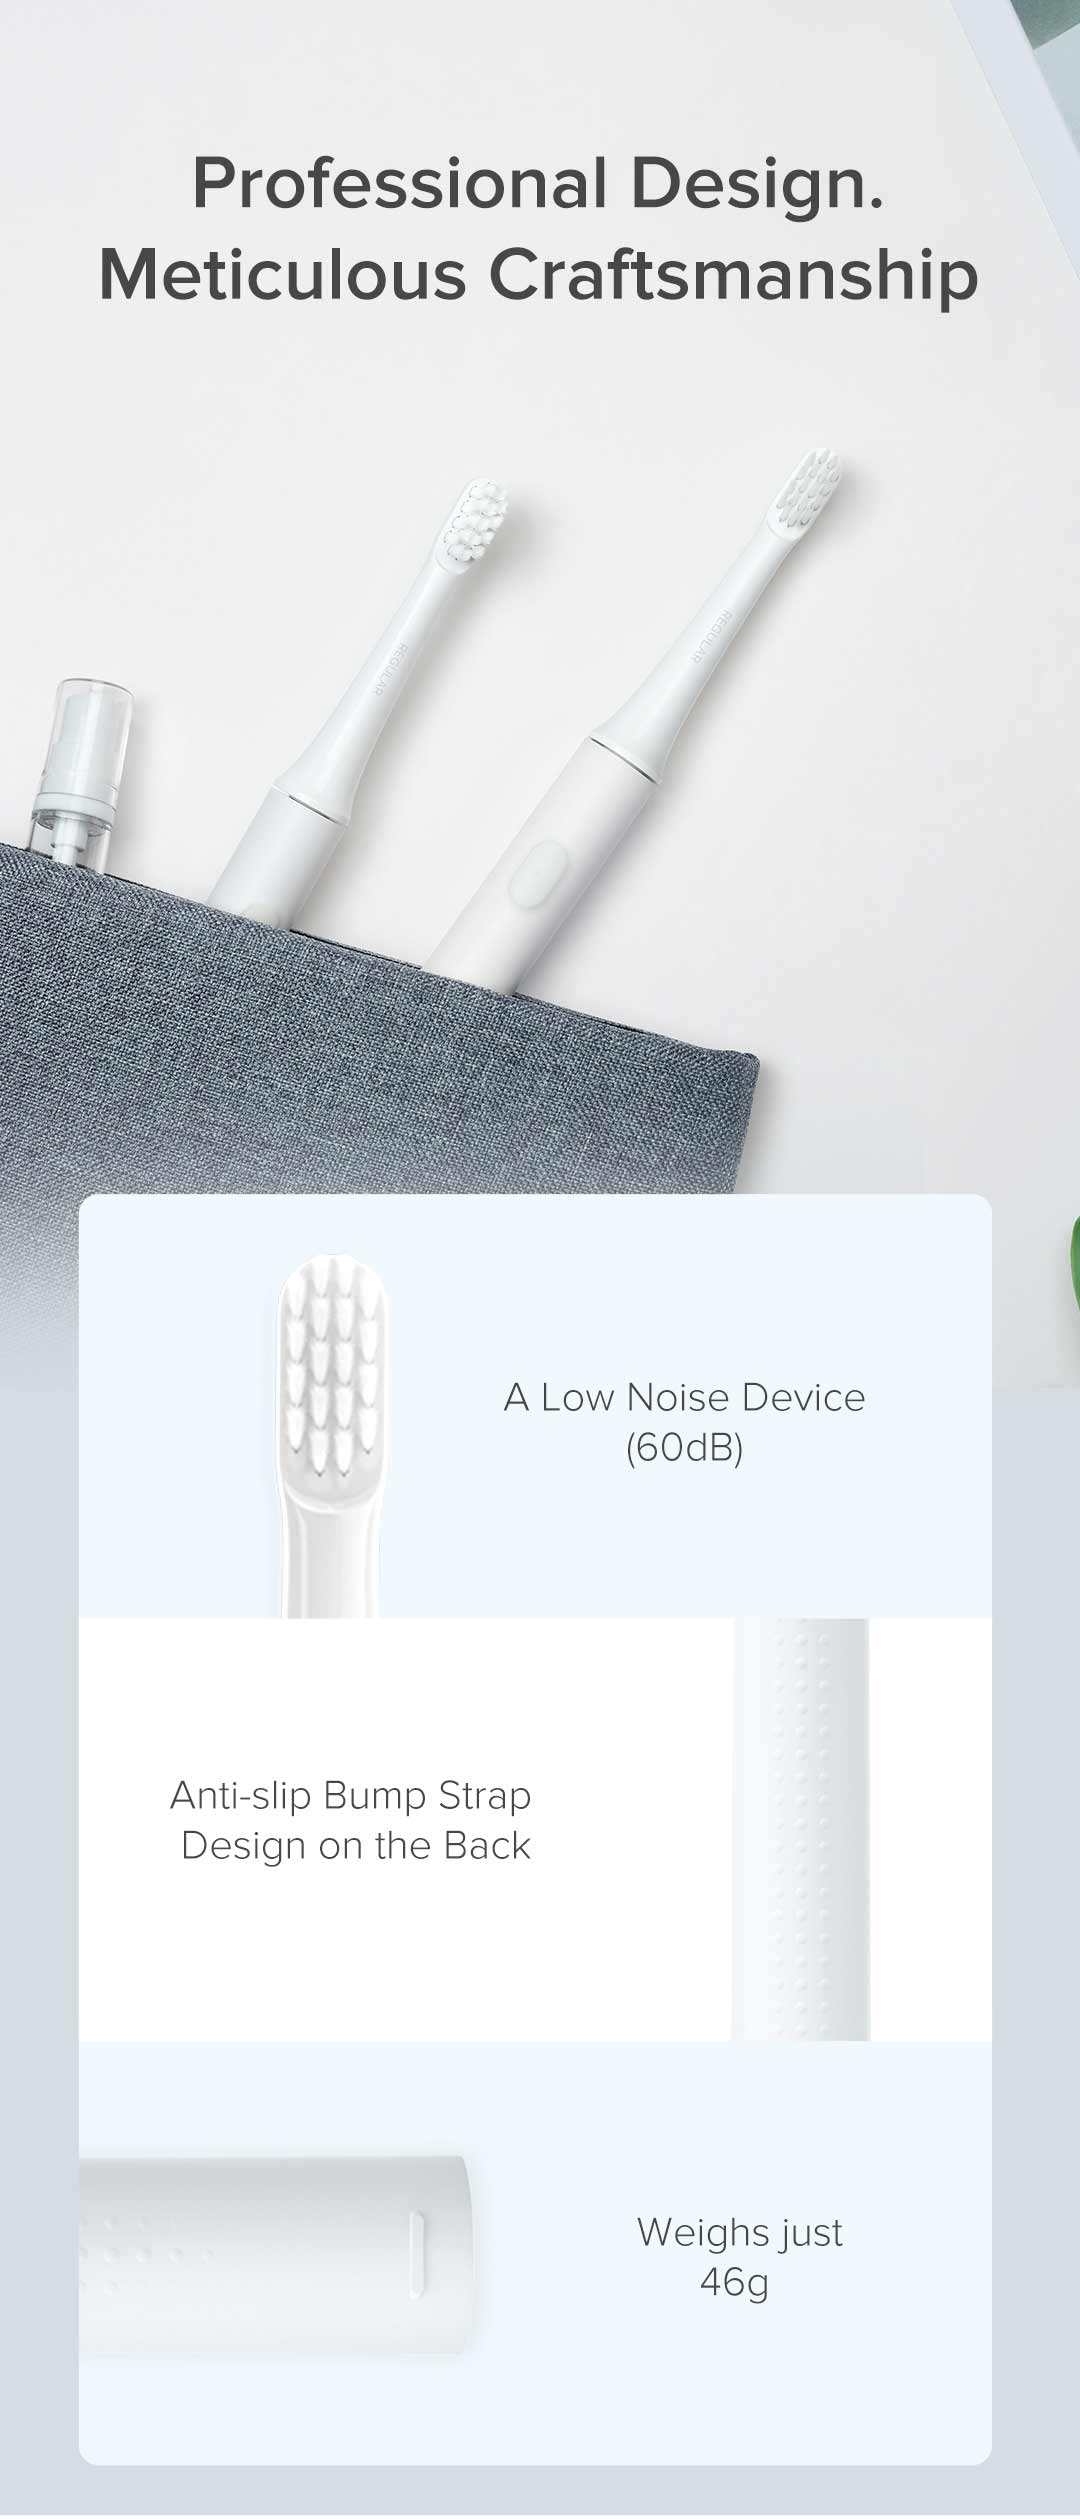 mi-electric-toothbrush-T100-proffesional-design